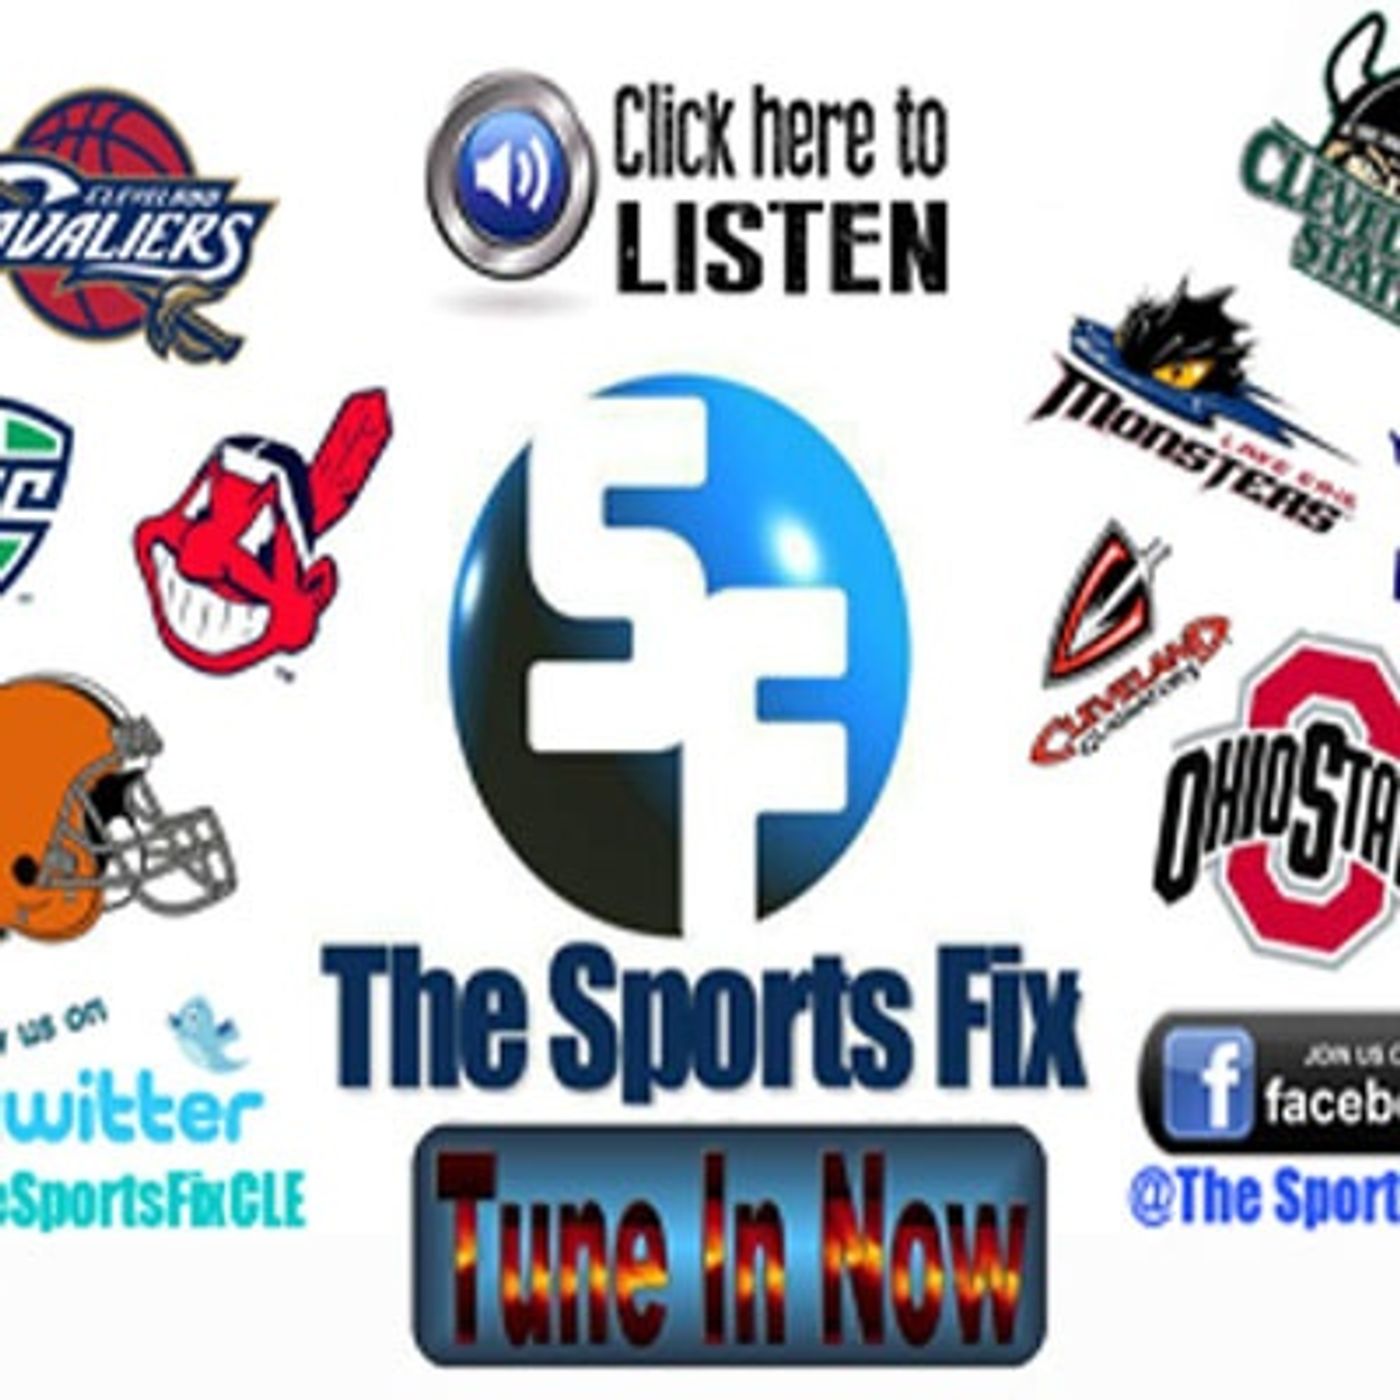 The Sports Fix - Weds Oct 14, 2015 Pt 2